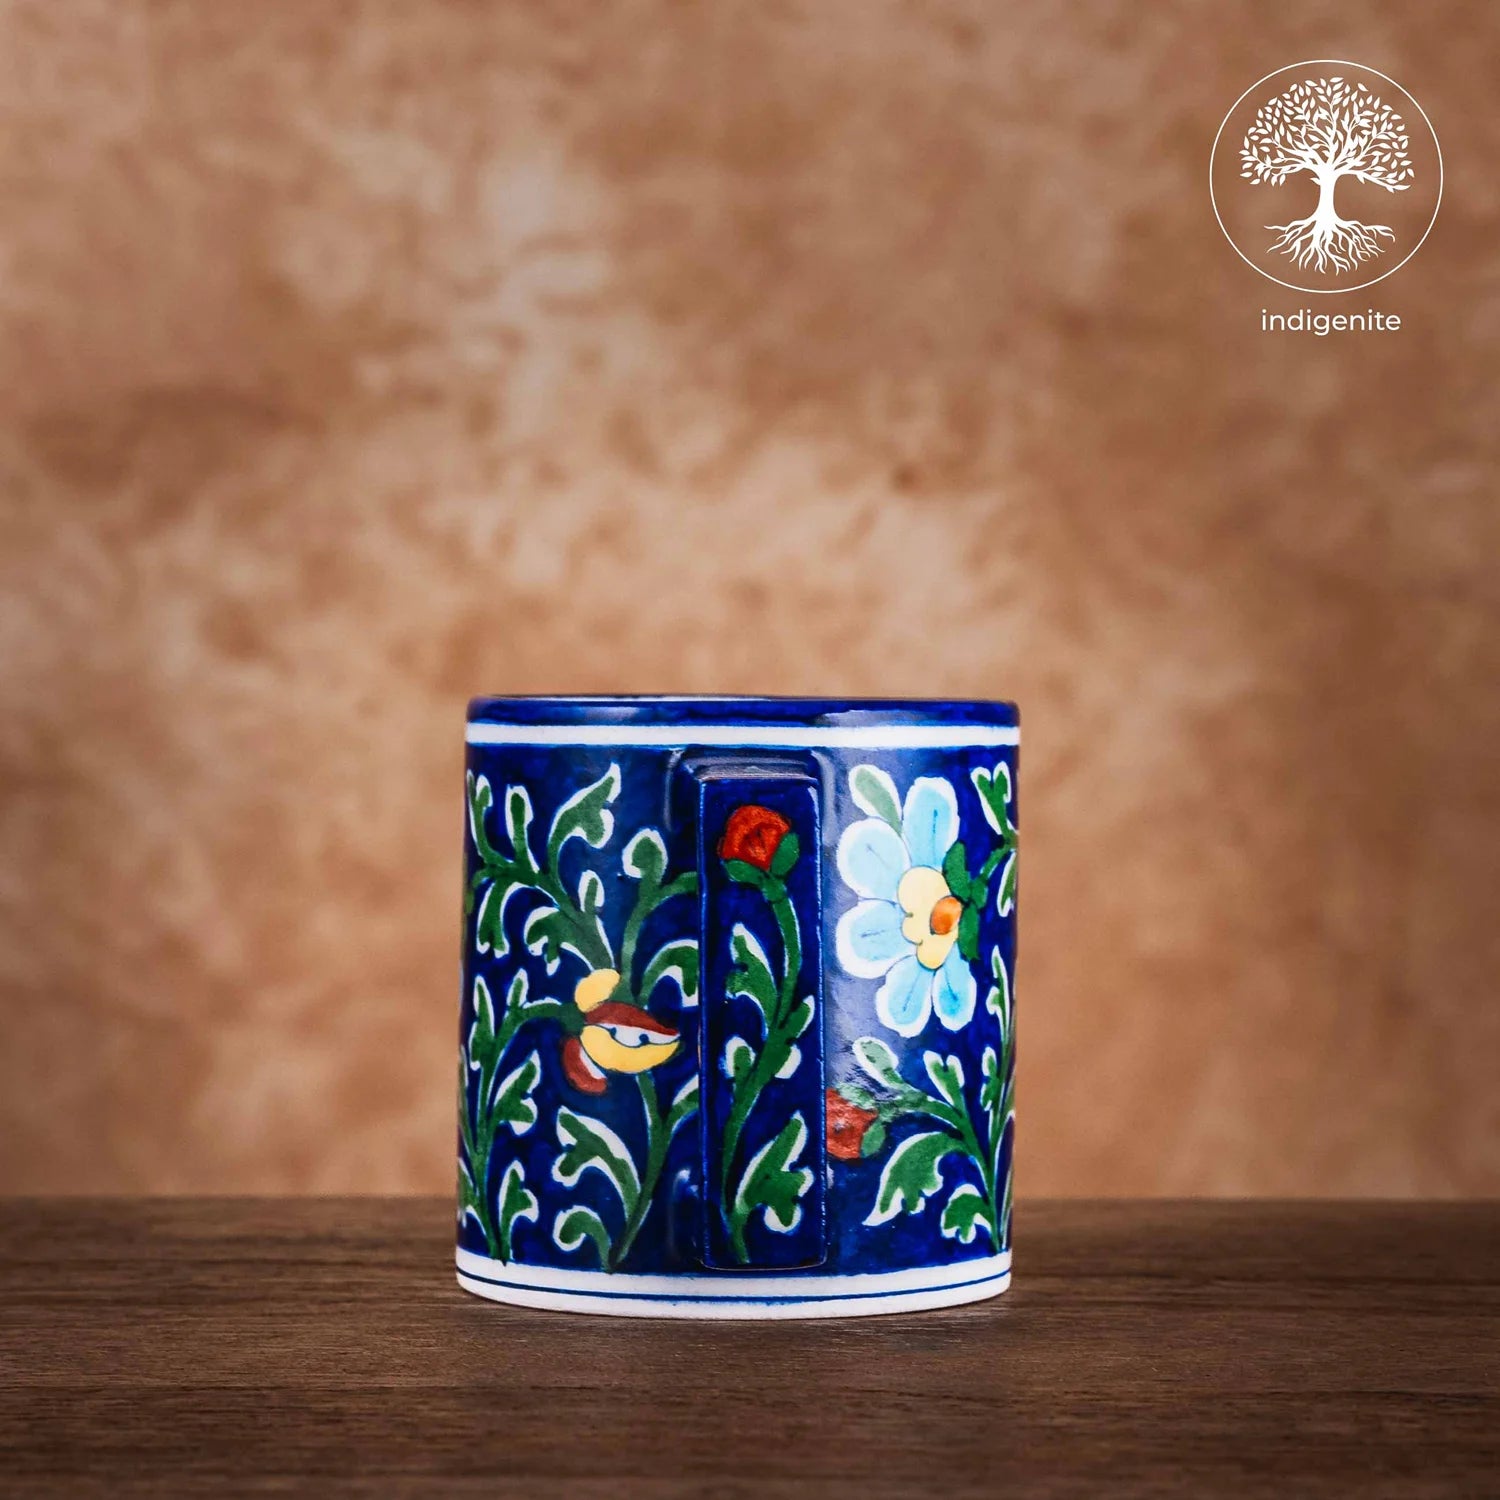 Midnight Blue and Colorful Floral Mug 4 Inches - Jaipur Blue Pottery